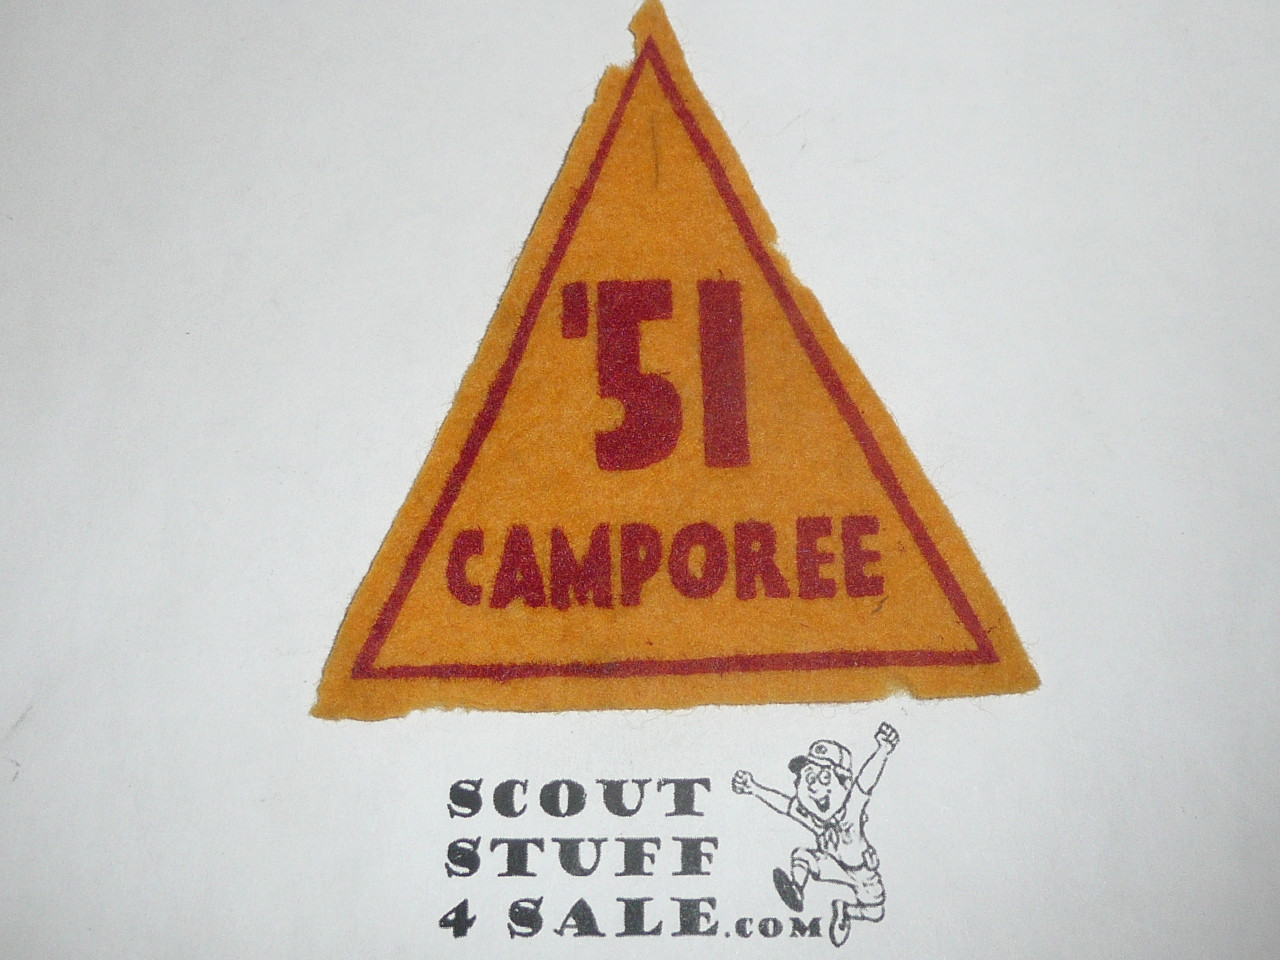 1951 Camporee Patch, Generic BSA issue, gold felt